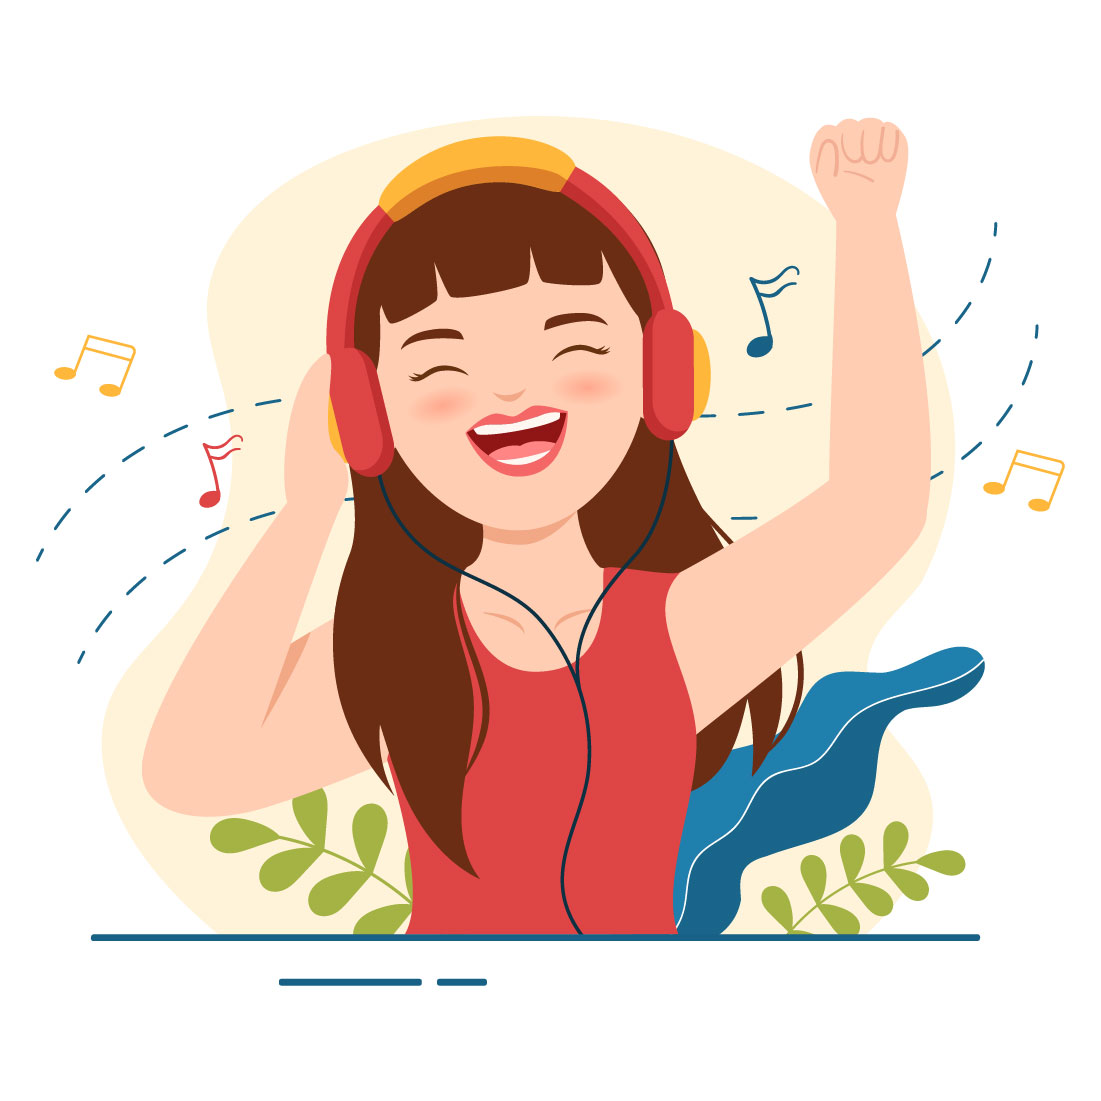 Adorable cartoon image of a girl listening to music with headphones.